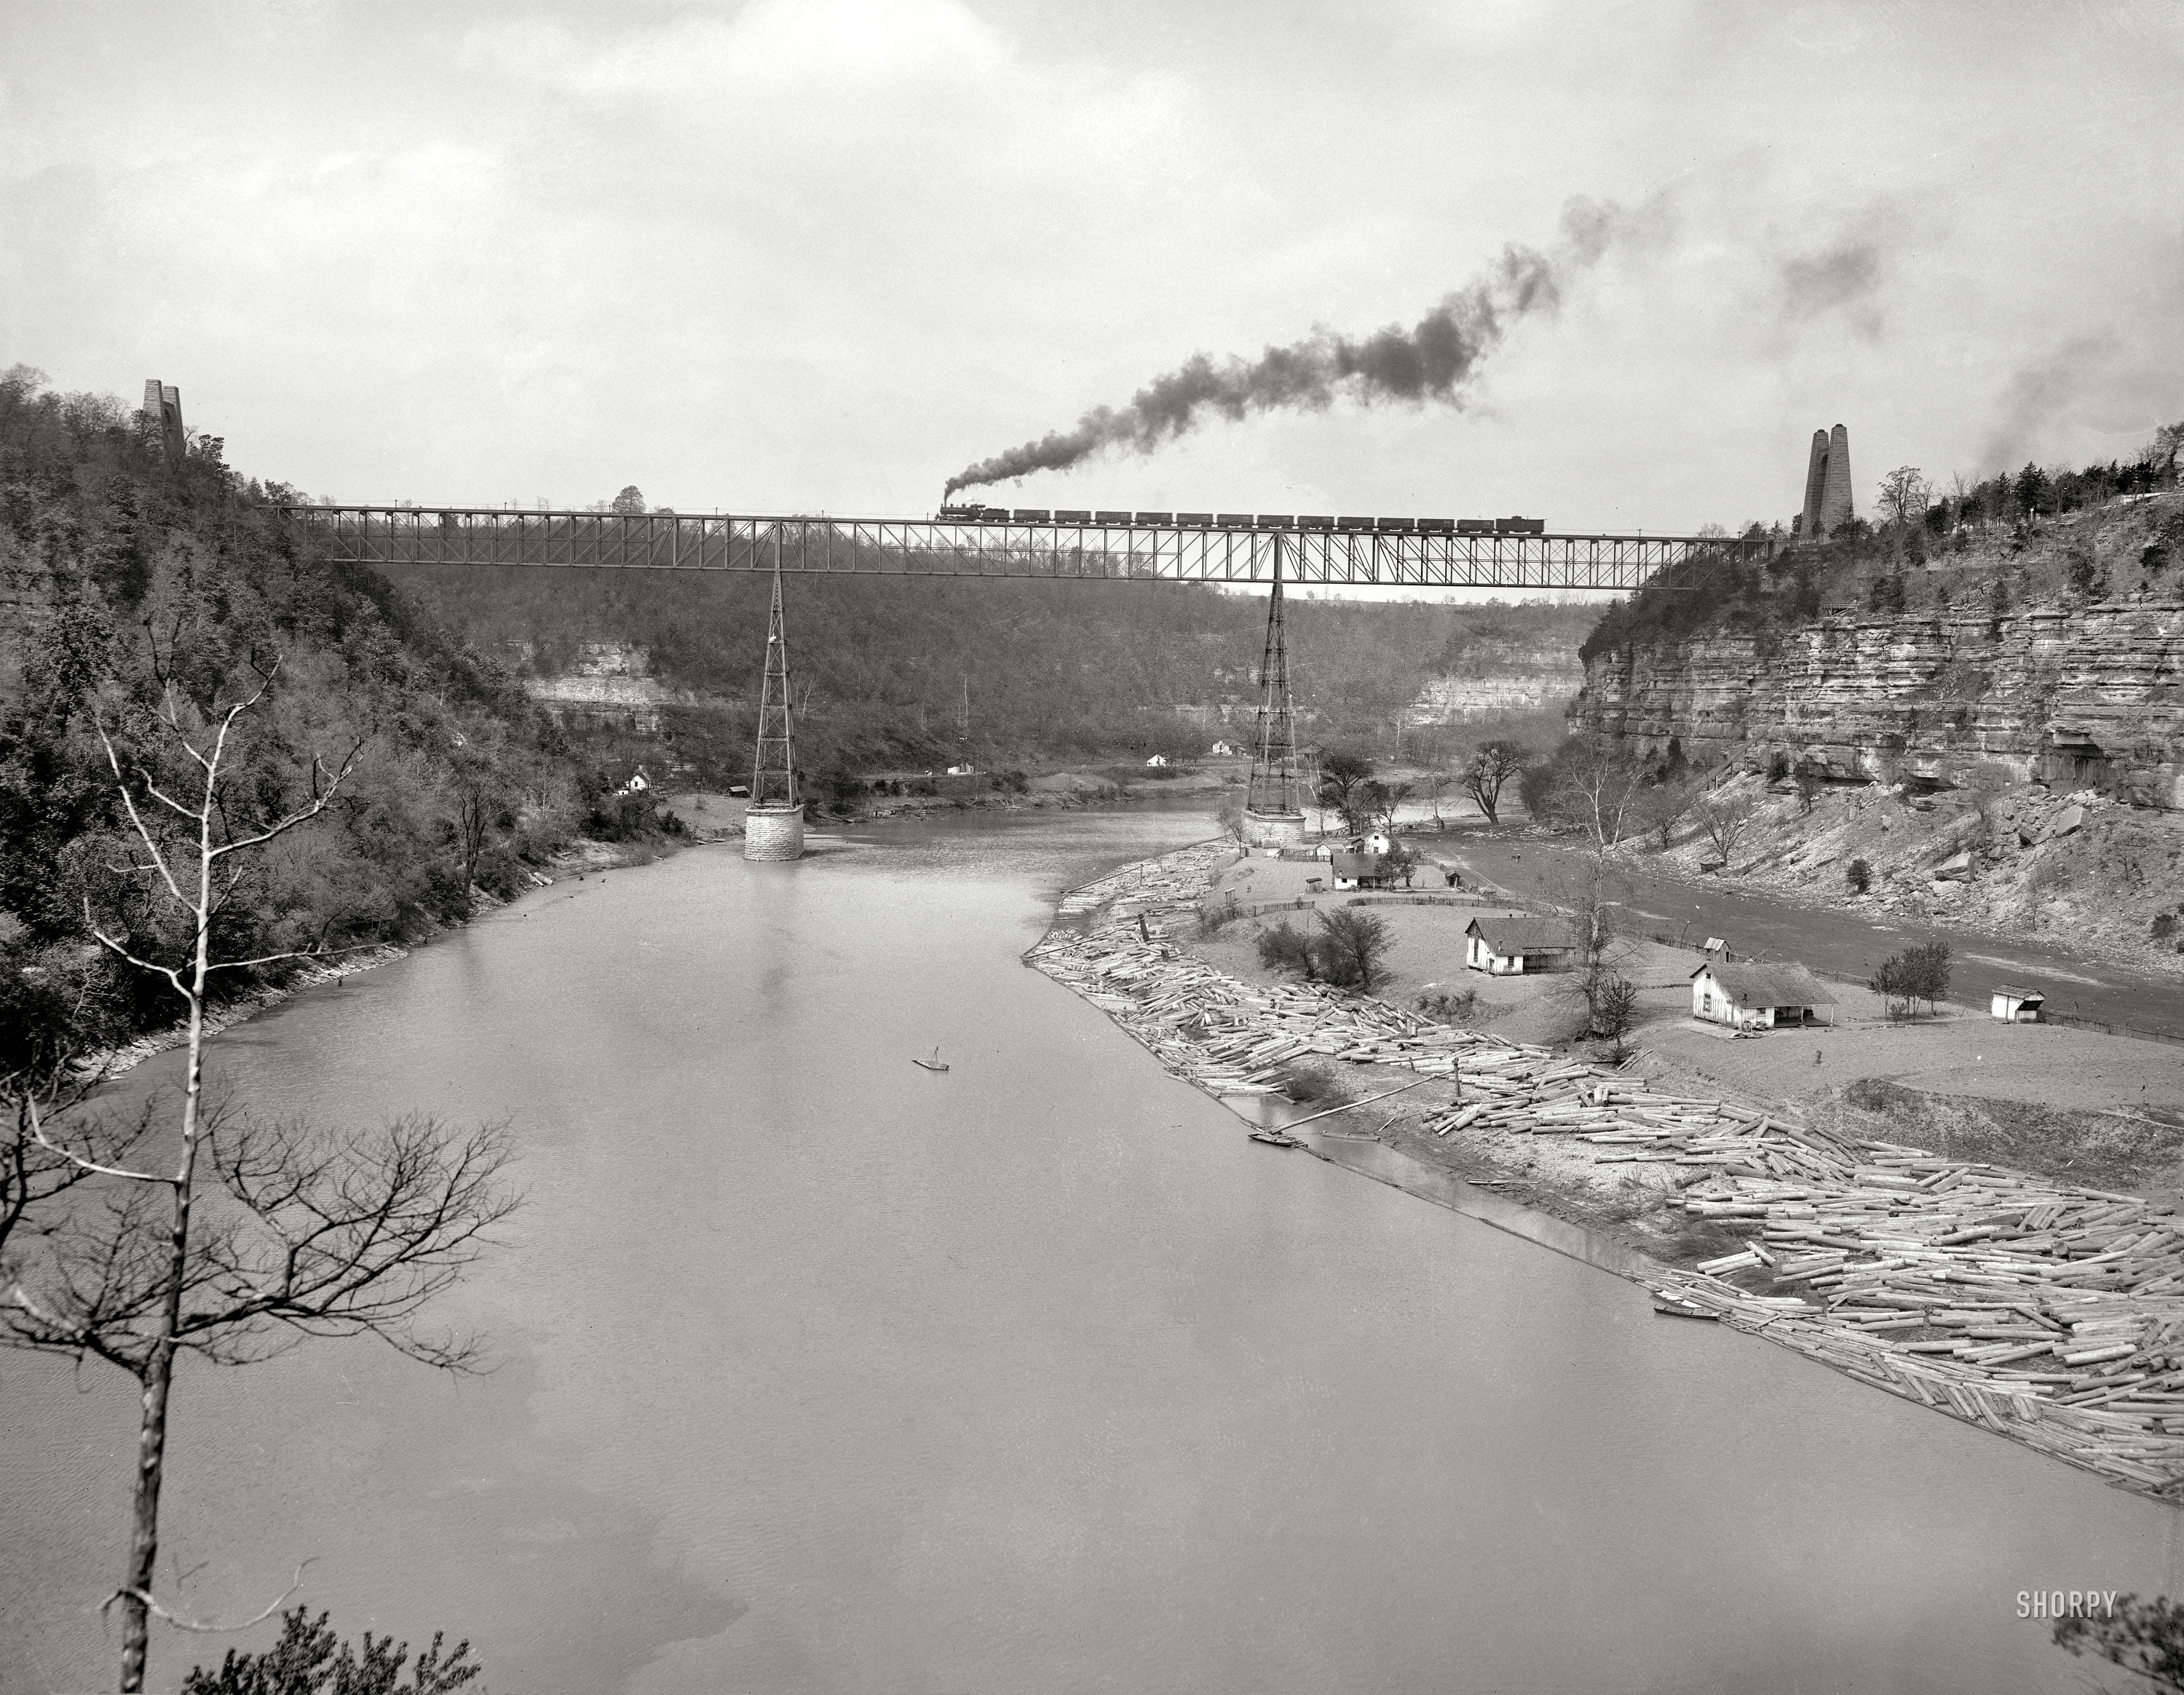 High Bridge, Kentucky, circa 1907. "High Bridge and Kentucky River." At right is a section of the stairway seen here yesterday. 8x10 glass negative. View full size.